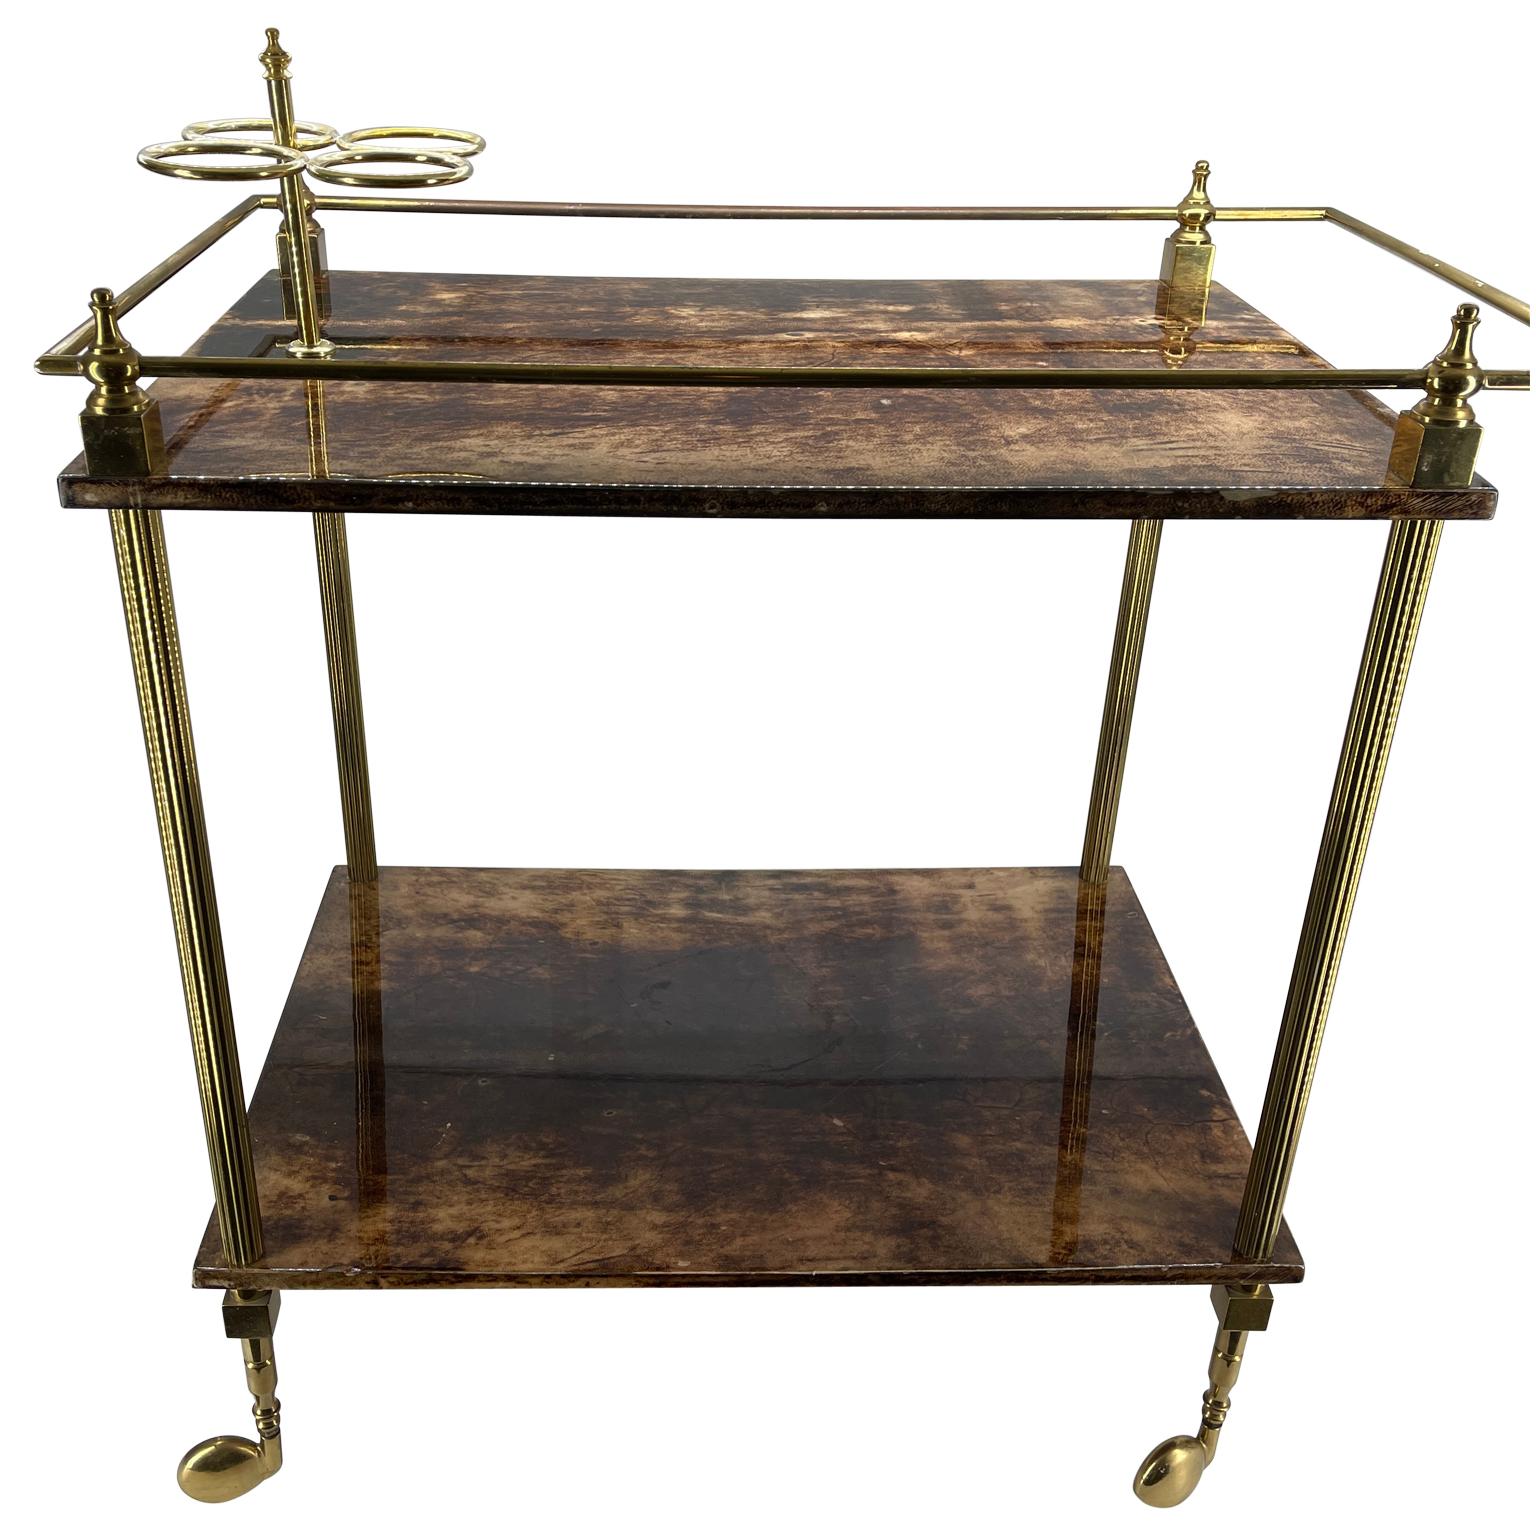 Mid-Century Modern Aldo Tura Goatskin and polished brass bar cart. A goatskin covered double tiered rolling bar cart with brass wheels, brass rails, handles and three ring bottle holder. The top tier of the bart cart displays a three bottle holder